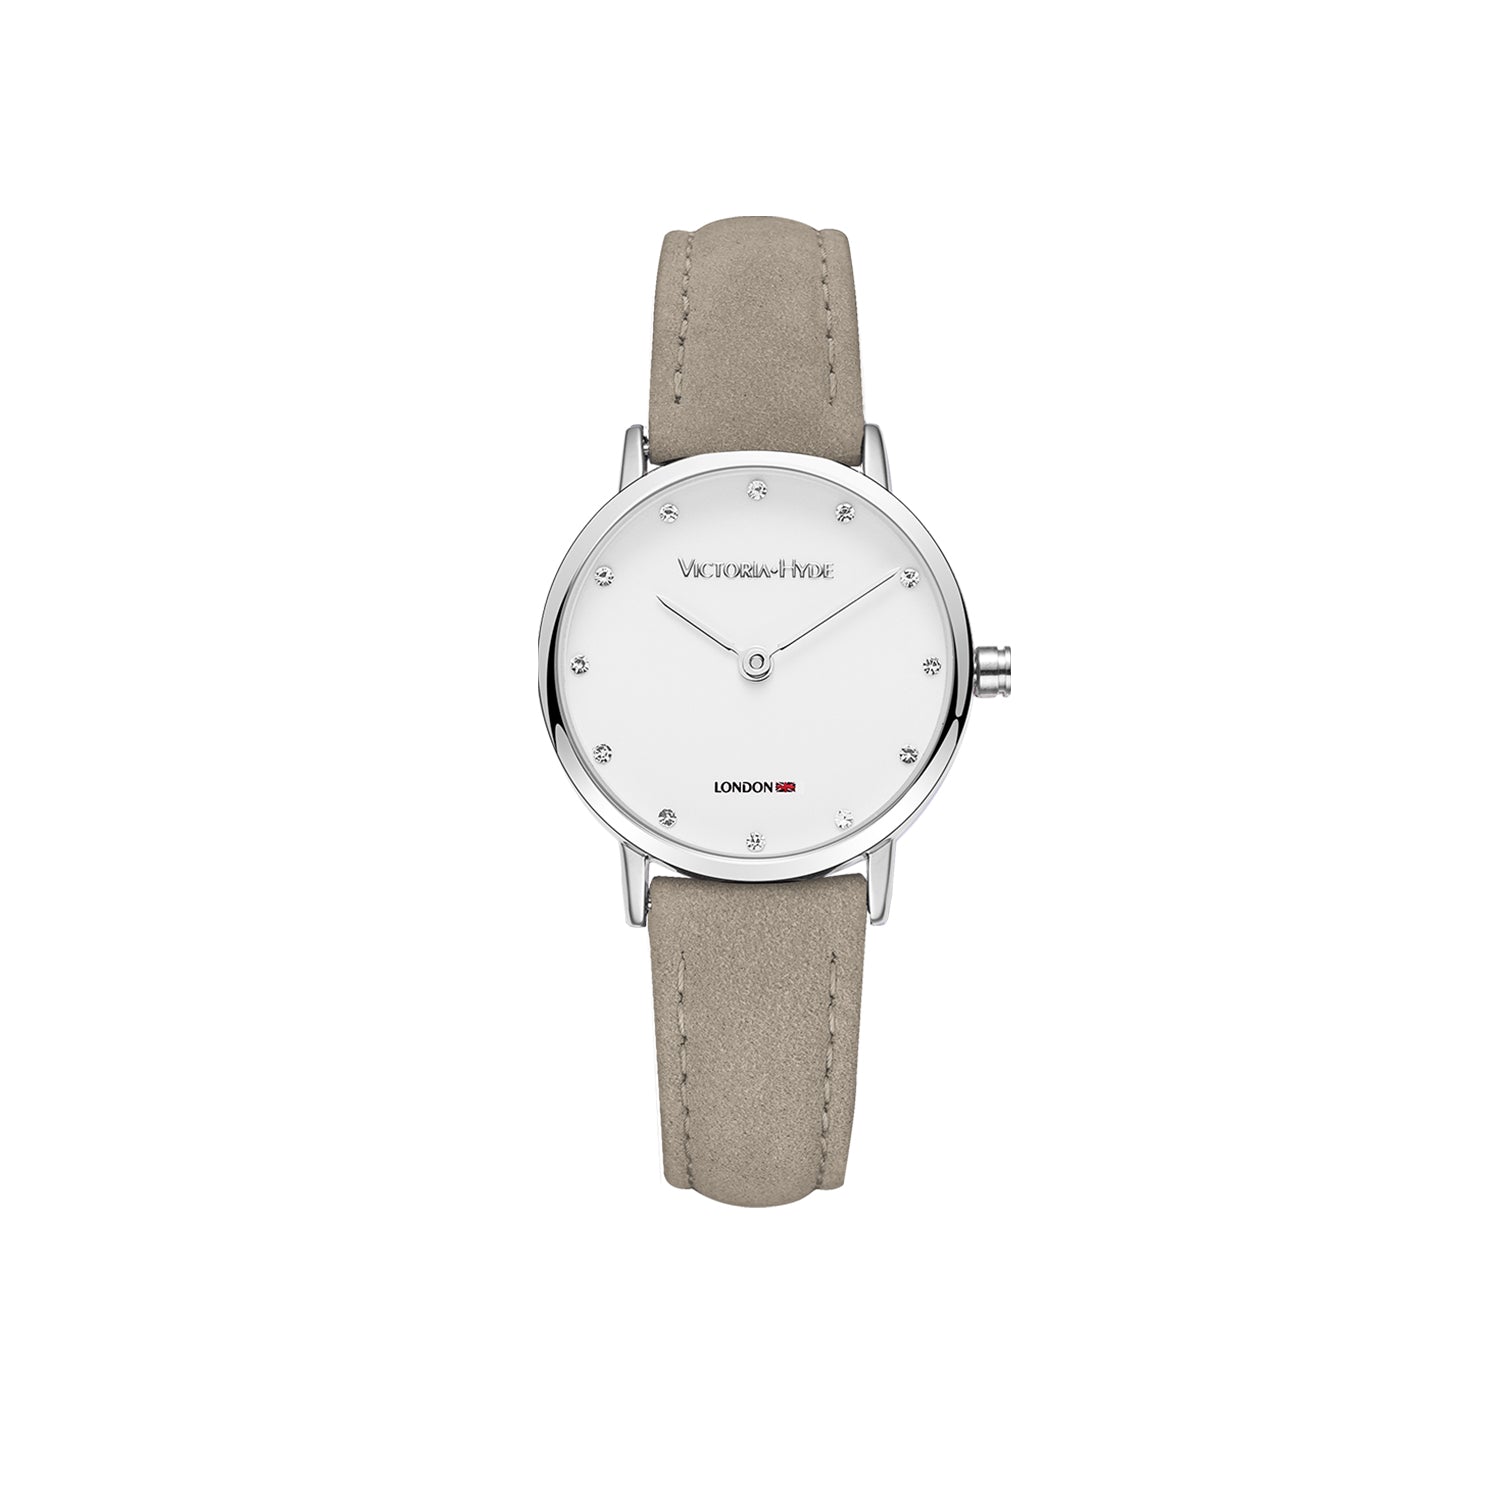 Pretty Ladies watch in light taupe